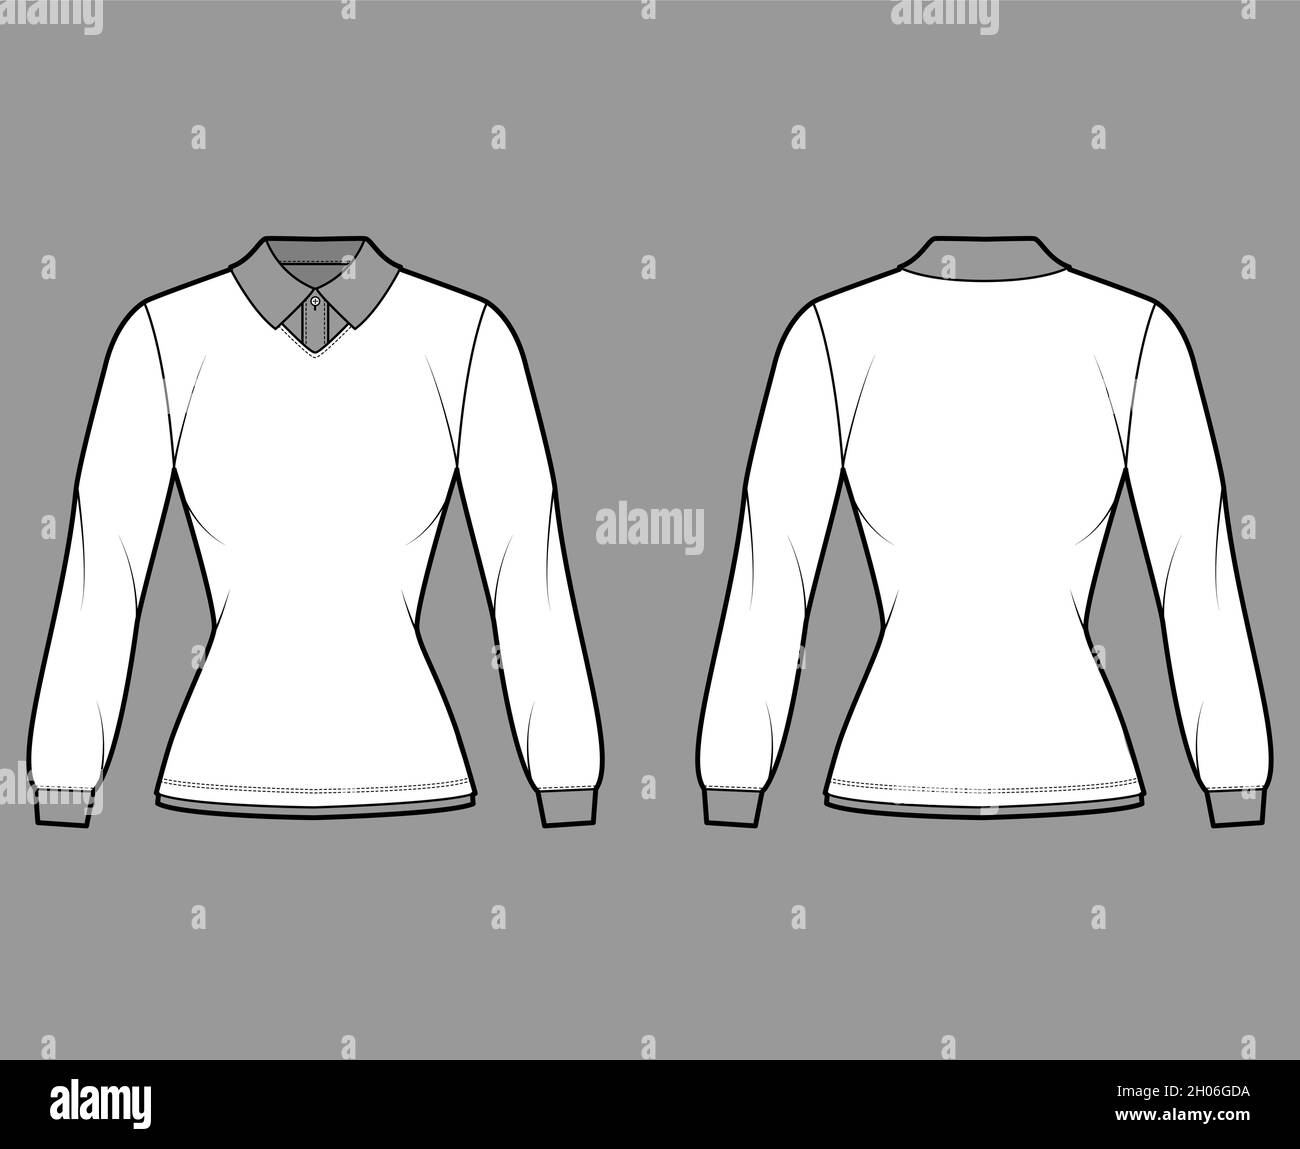 Shirt double collar technical fashion illustration with long sleeves, tunic length, henley neck, fitted body, classic collar. Apparel top outwear template front, back, white color. Women CAD mockup Stock Vector